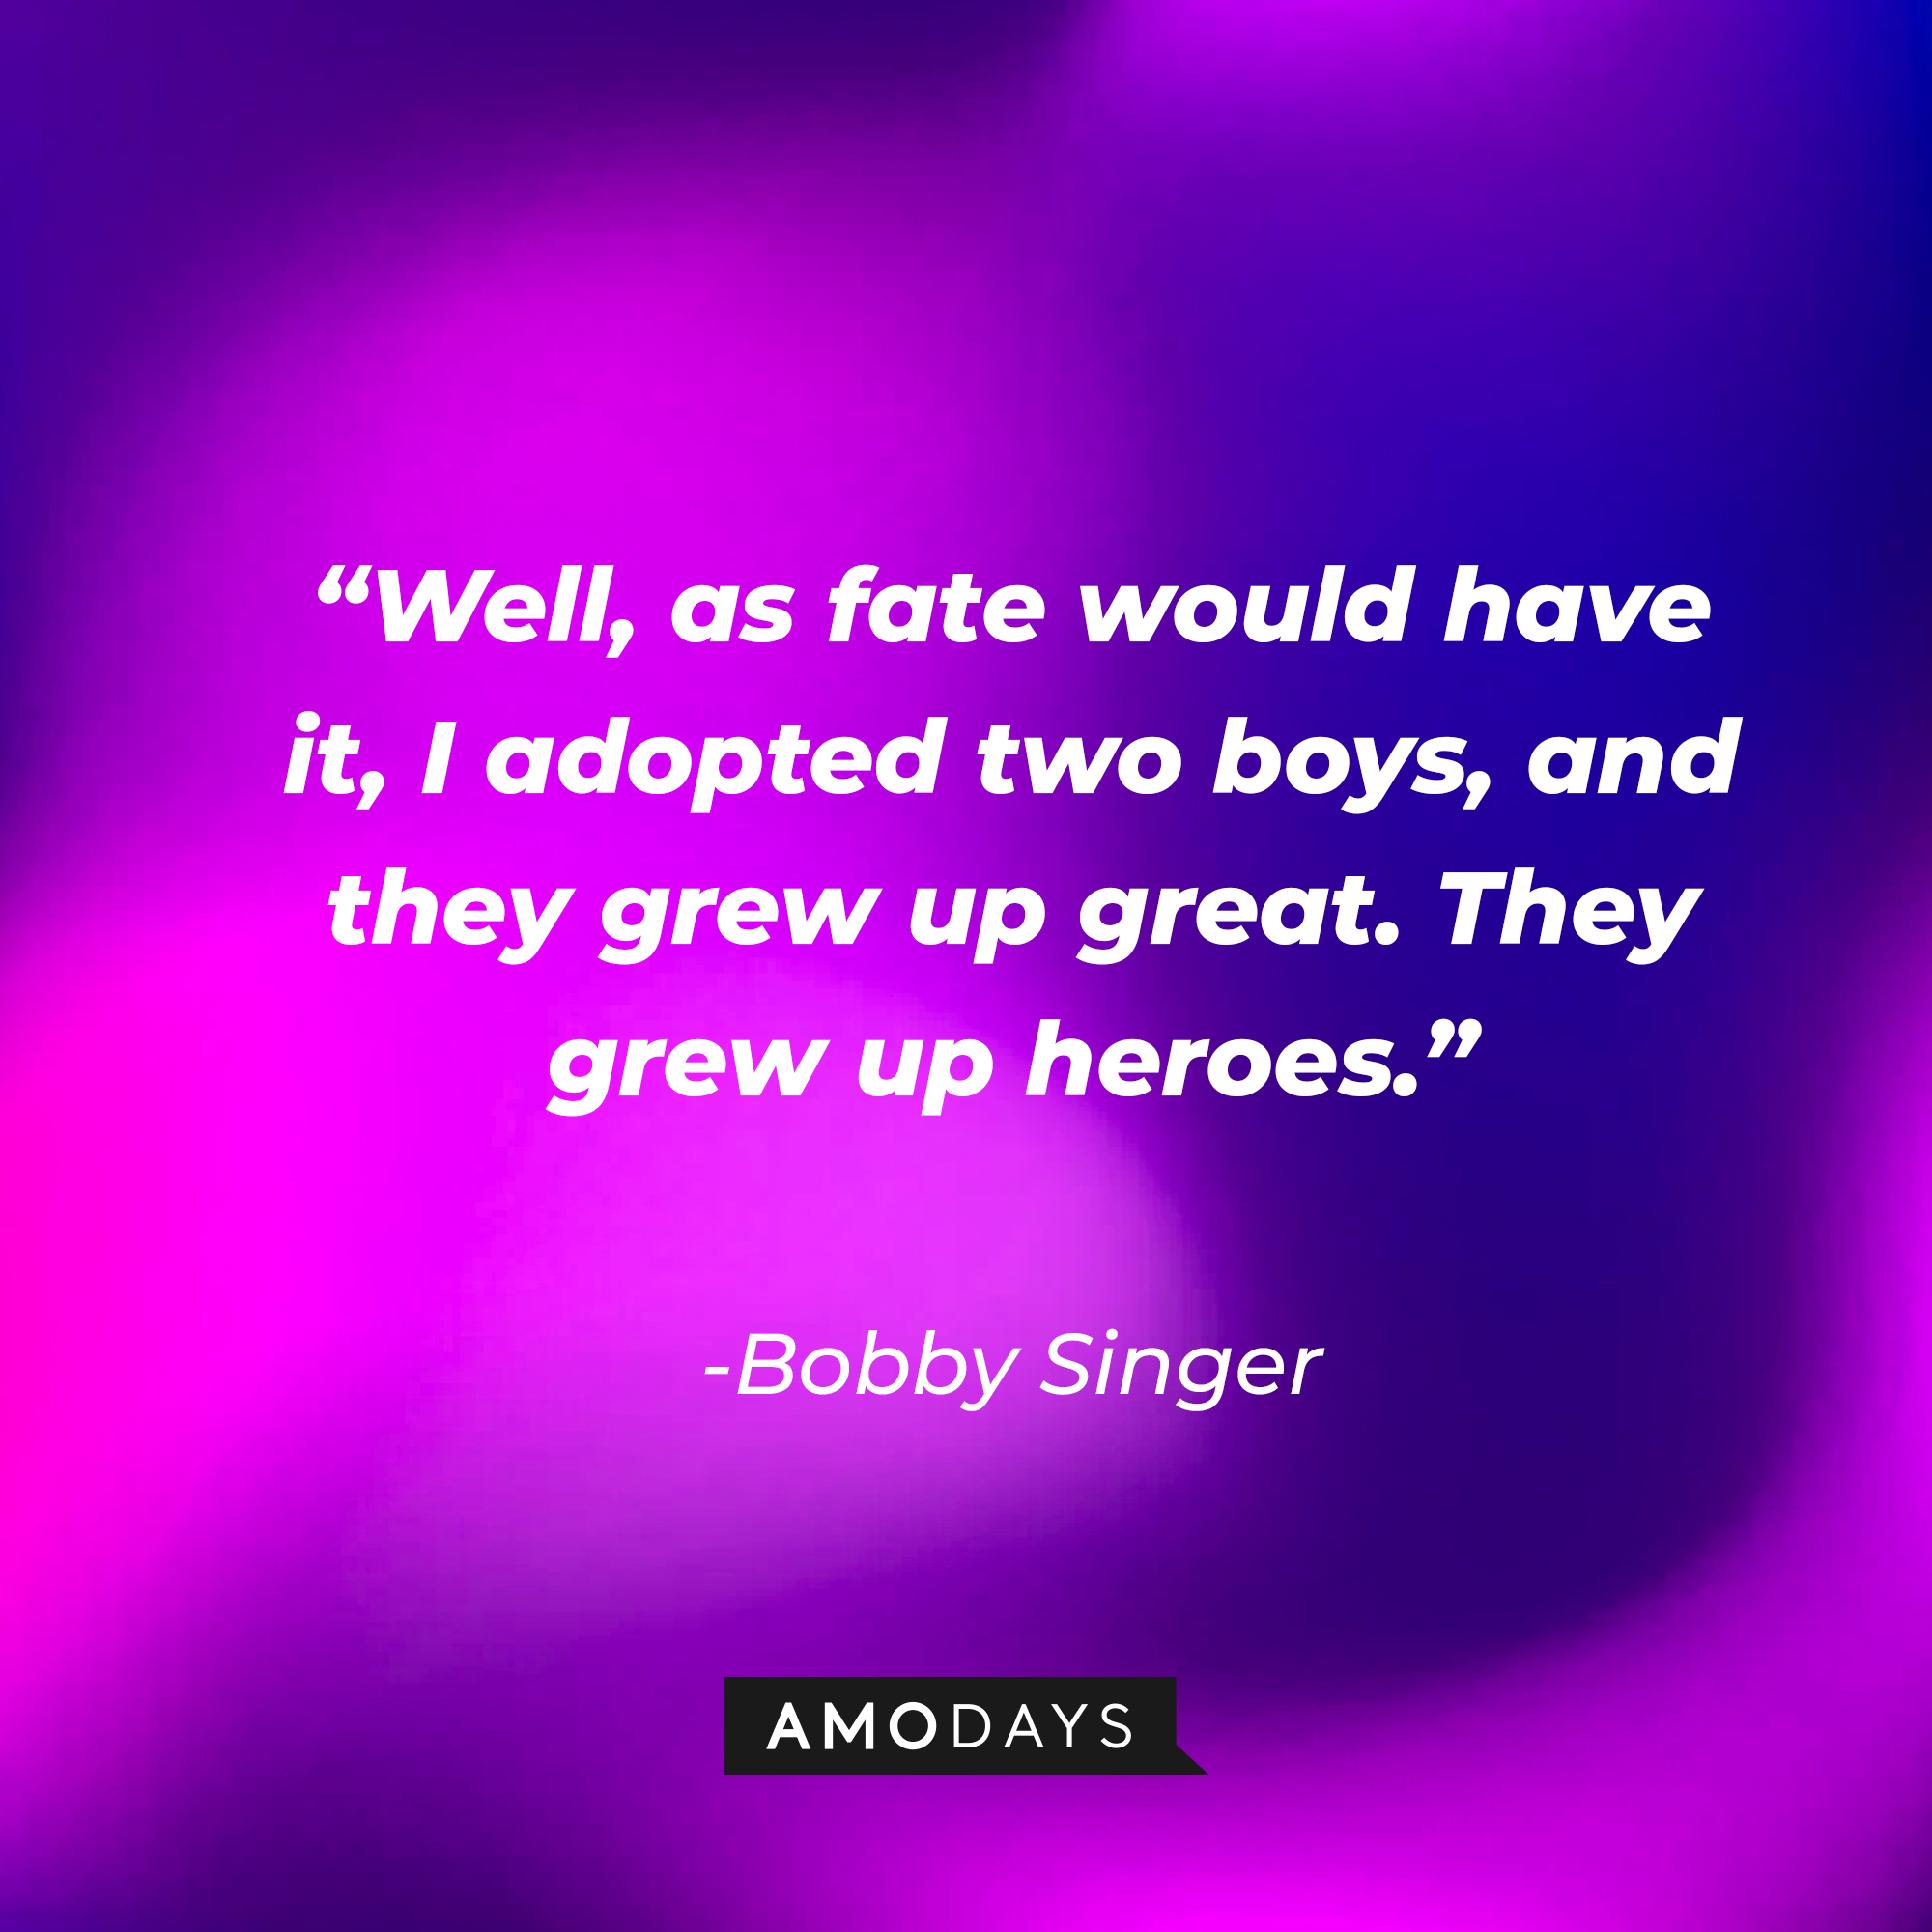 Bobby Singer's quote: "Well, as fate would have it, I adopted two boys, and they grew up great. They grew up heroes." | Source: Amodays